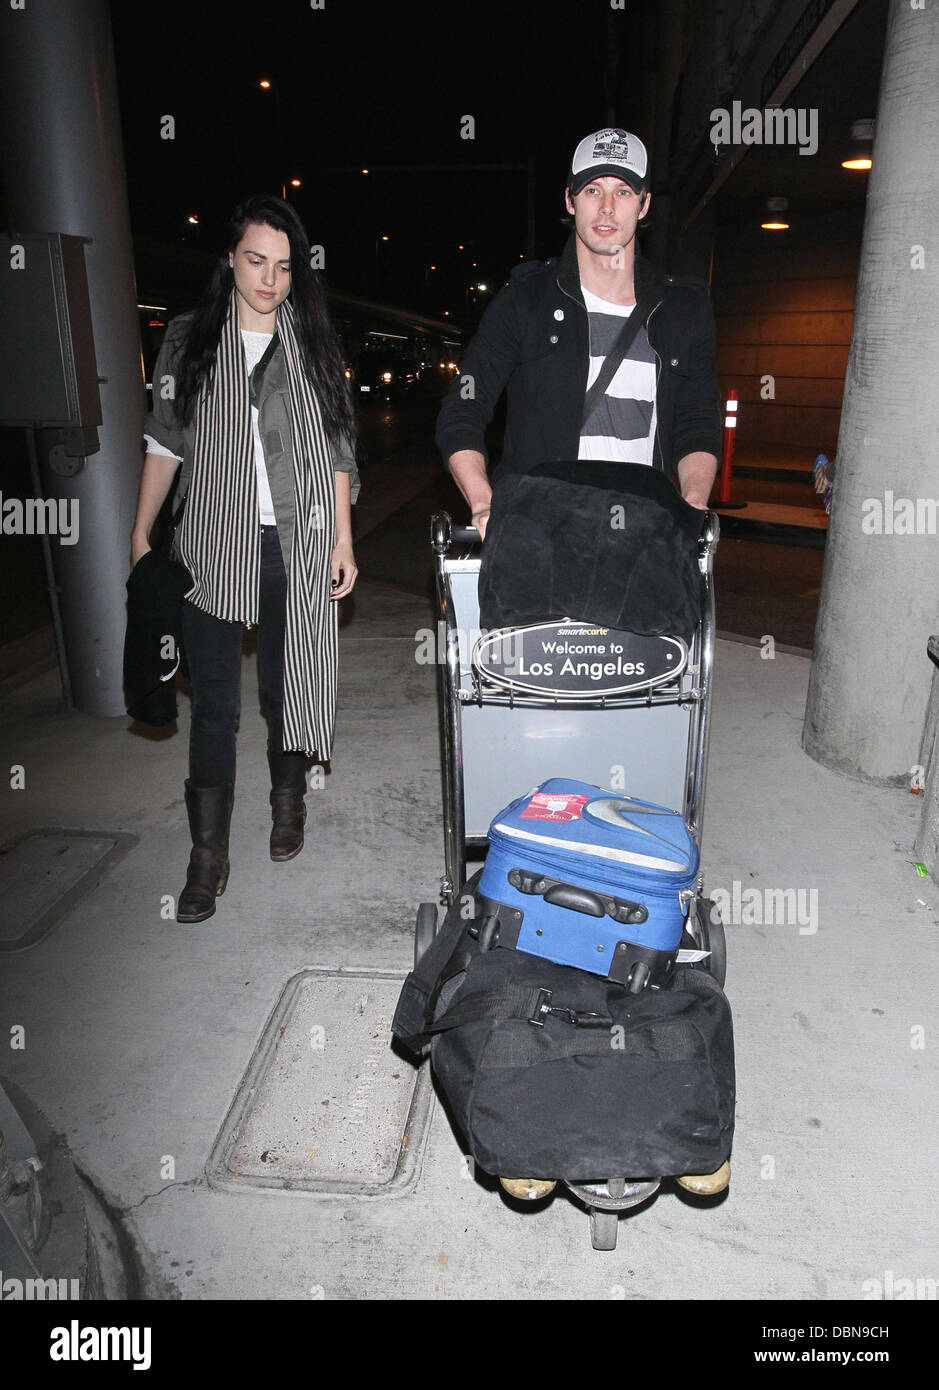 Katie McGrath and Bradley James The stars of international smash hit BBC television show 'Merlin' arrive at LAX on a flight from London Heathrow which was delayed over 4 hours from its scheduled arrival time. Los Angeles, California - 24.07.11 Stock Photo